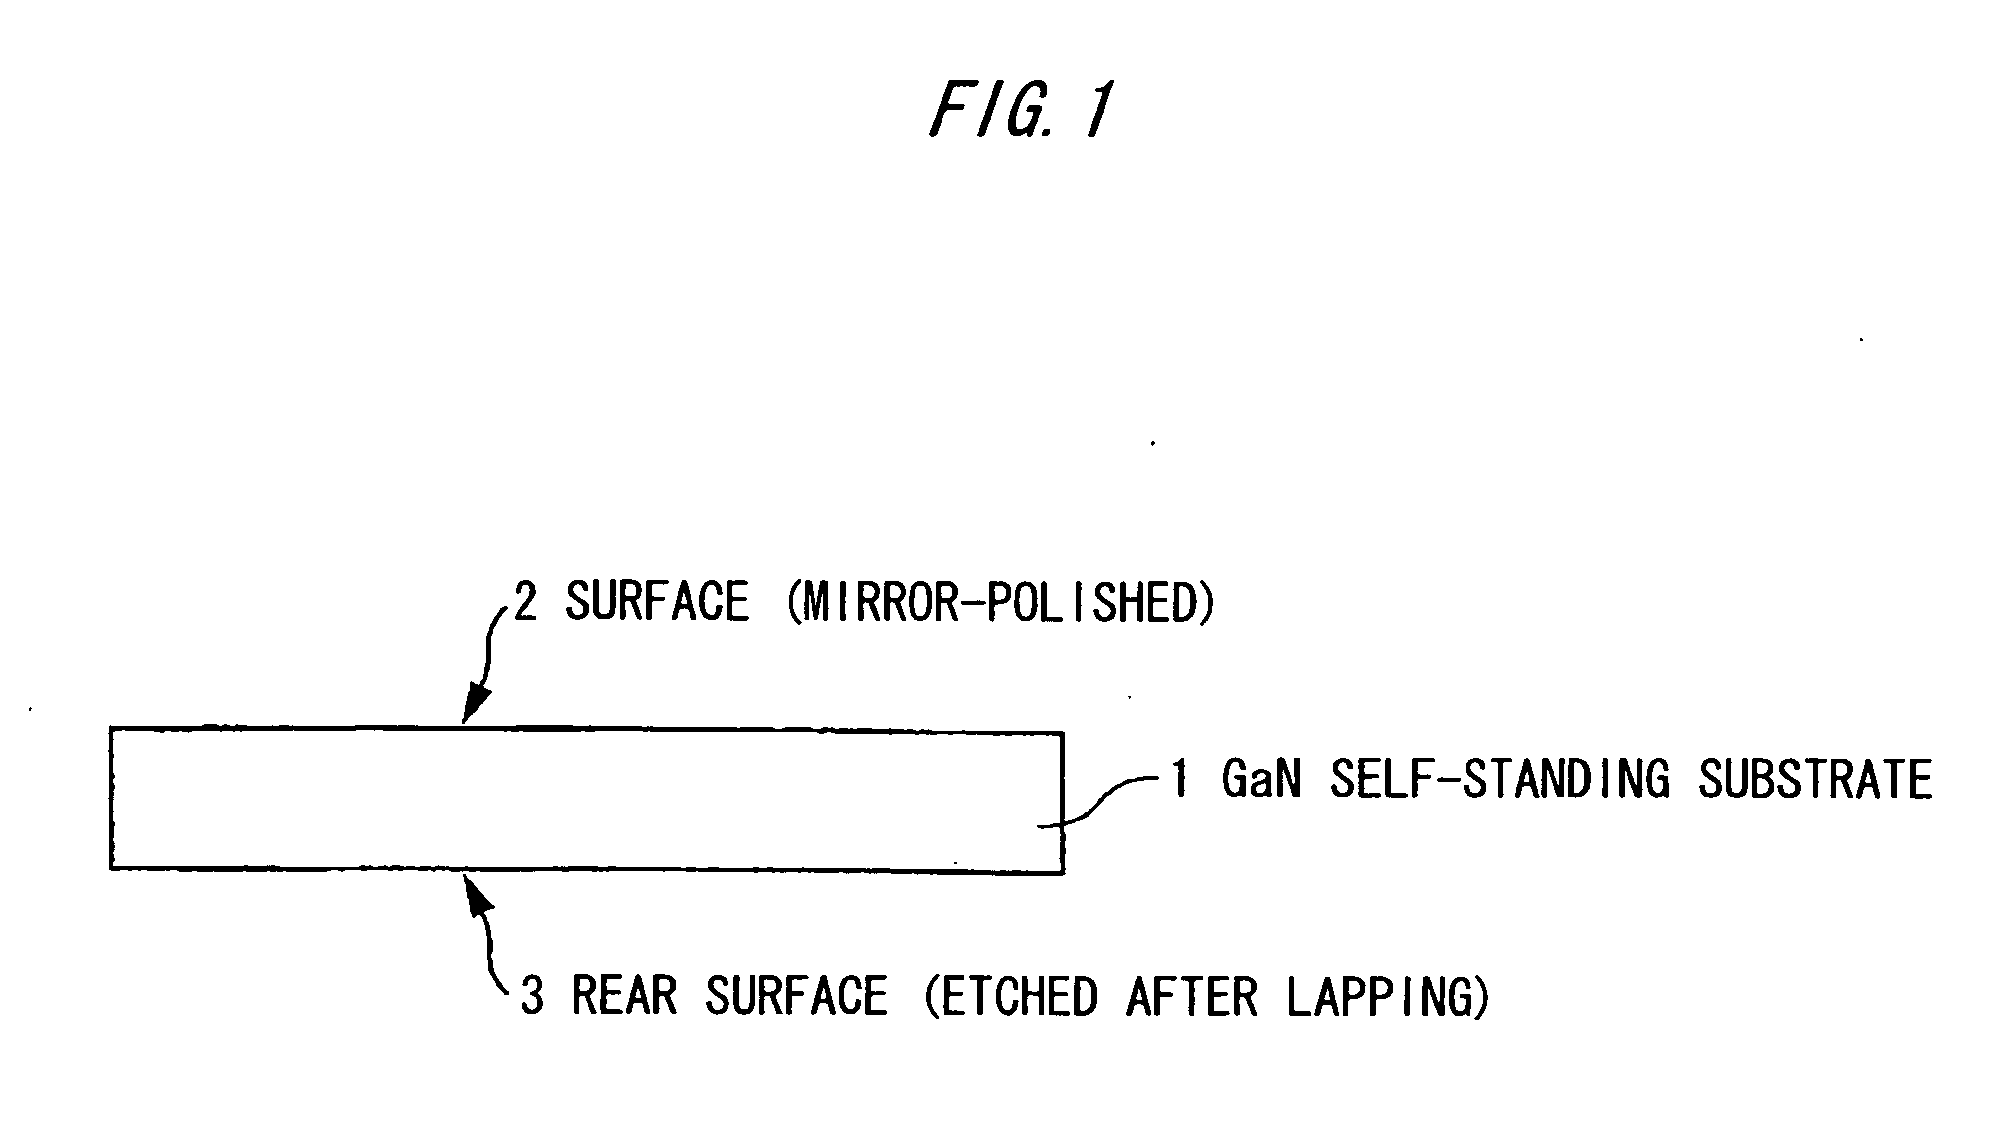 Self-standing GaN single crystal substrate, method of making same, and method of making a nitride semiconductor device